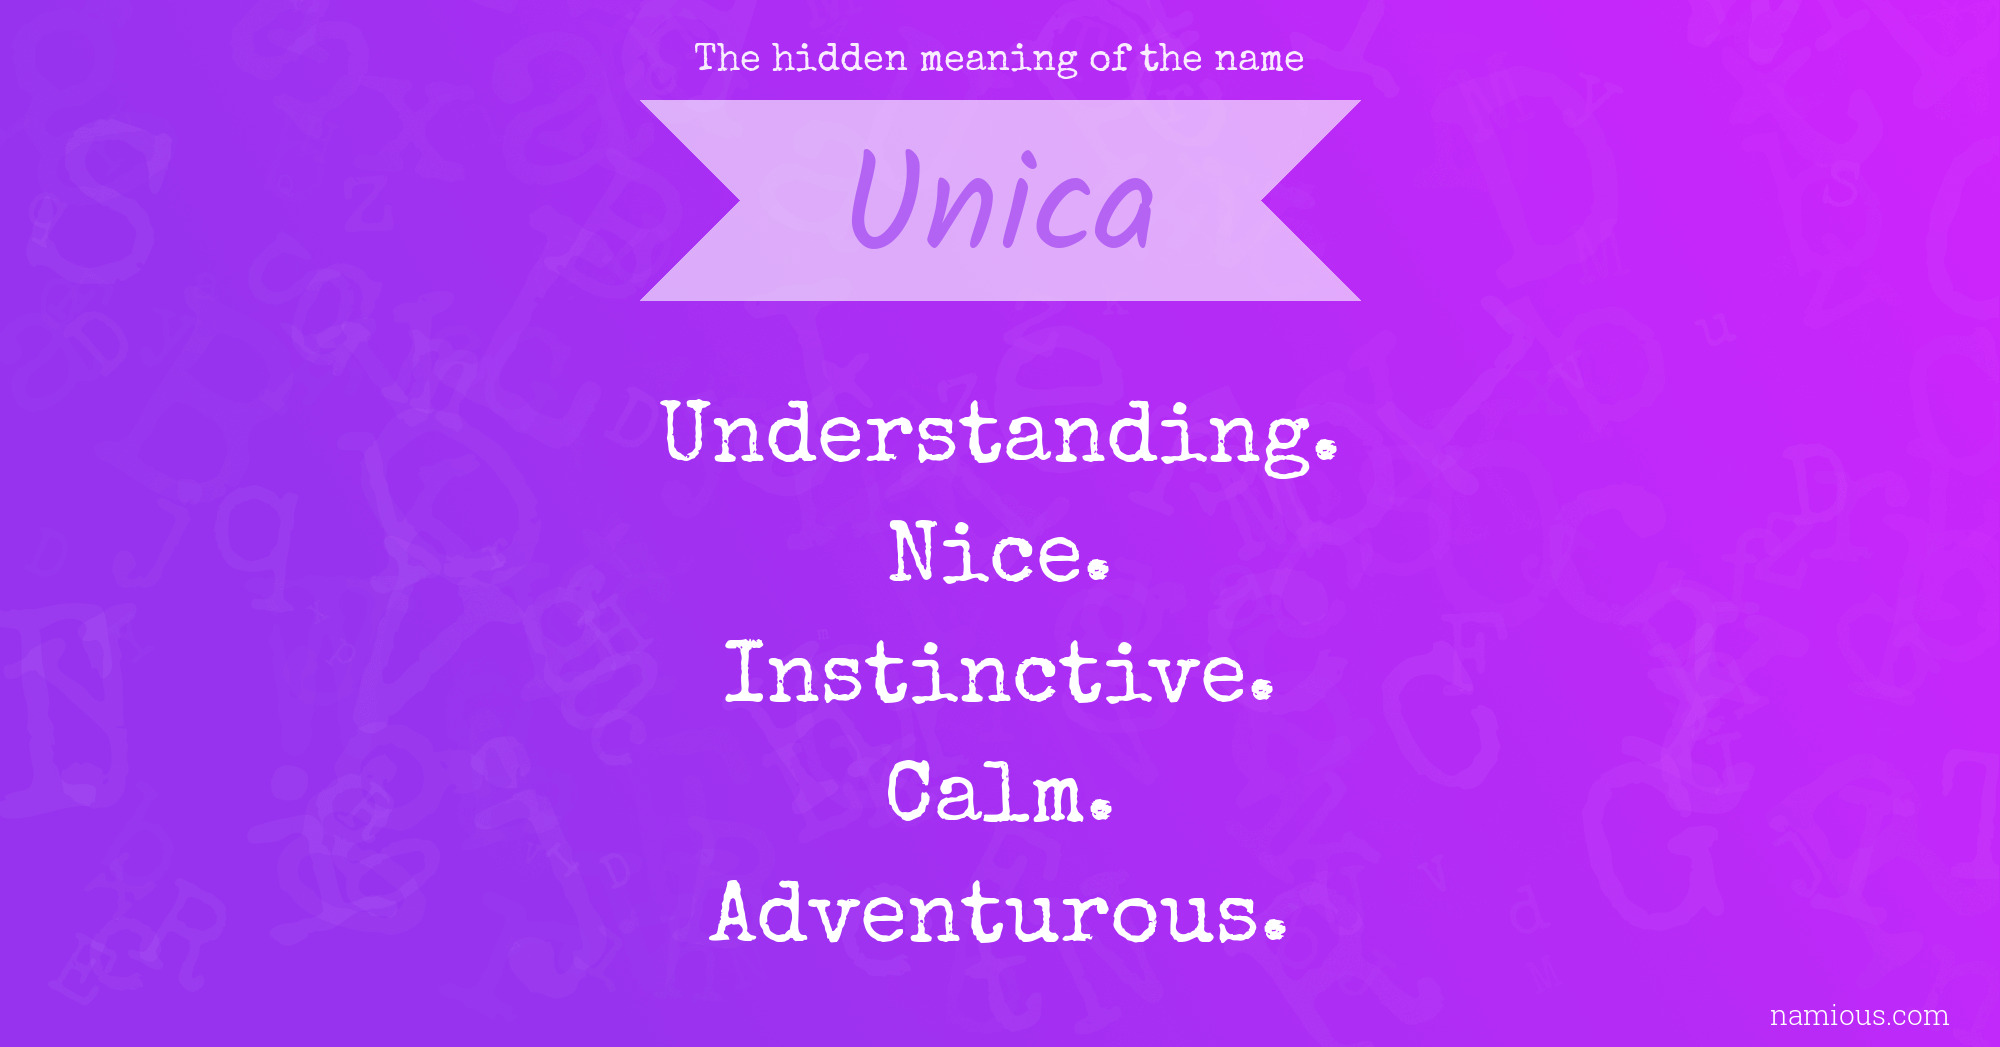 The hidden meaning of the name Unica